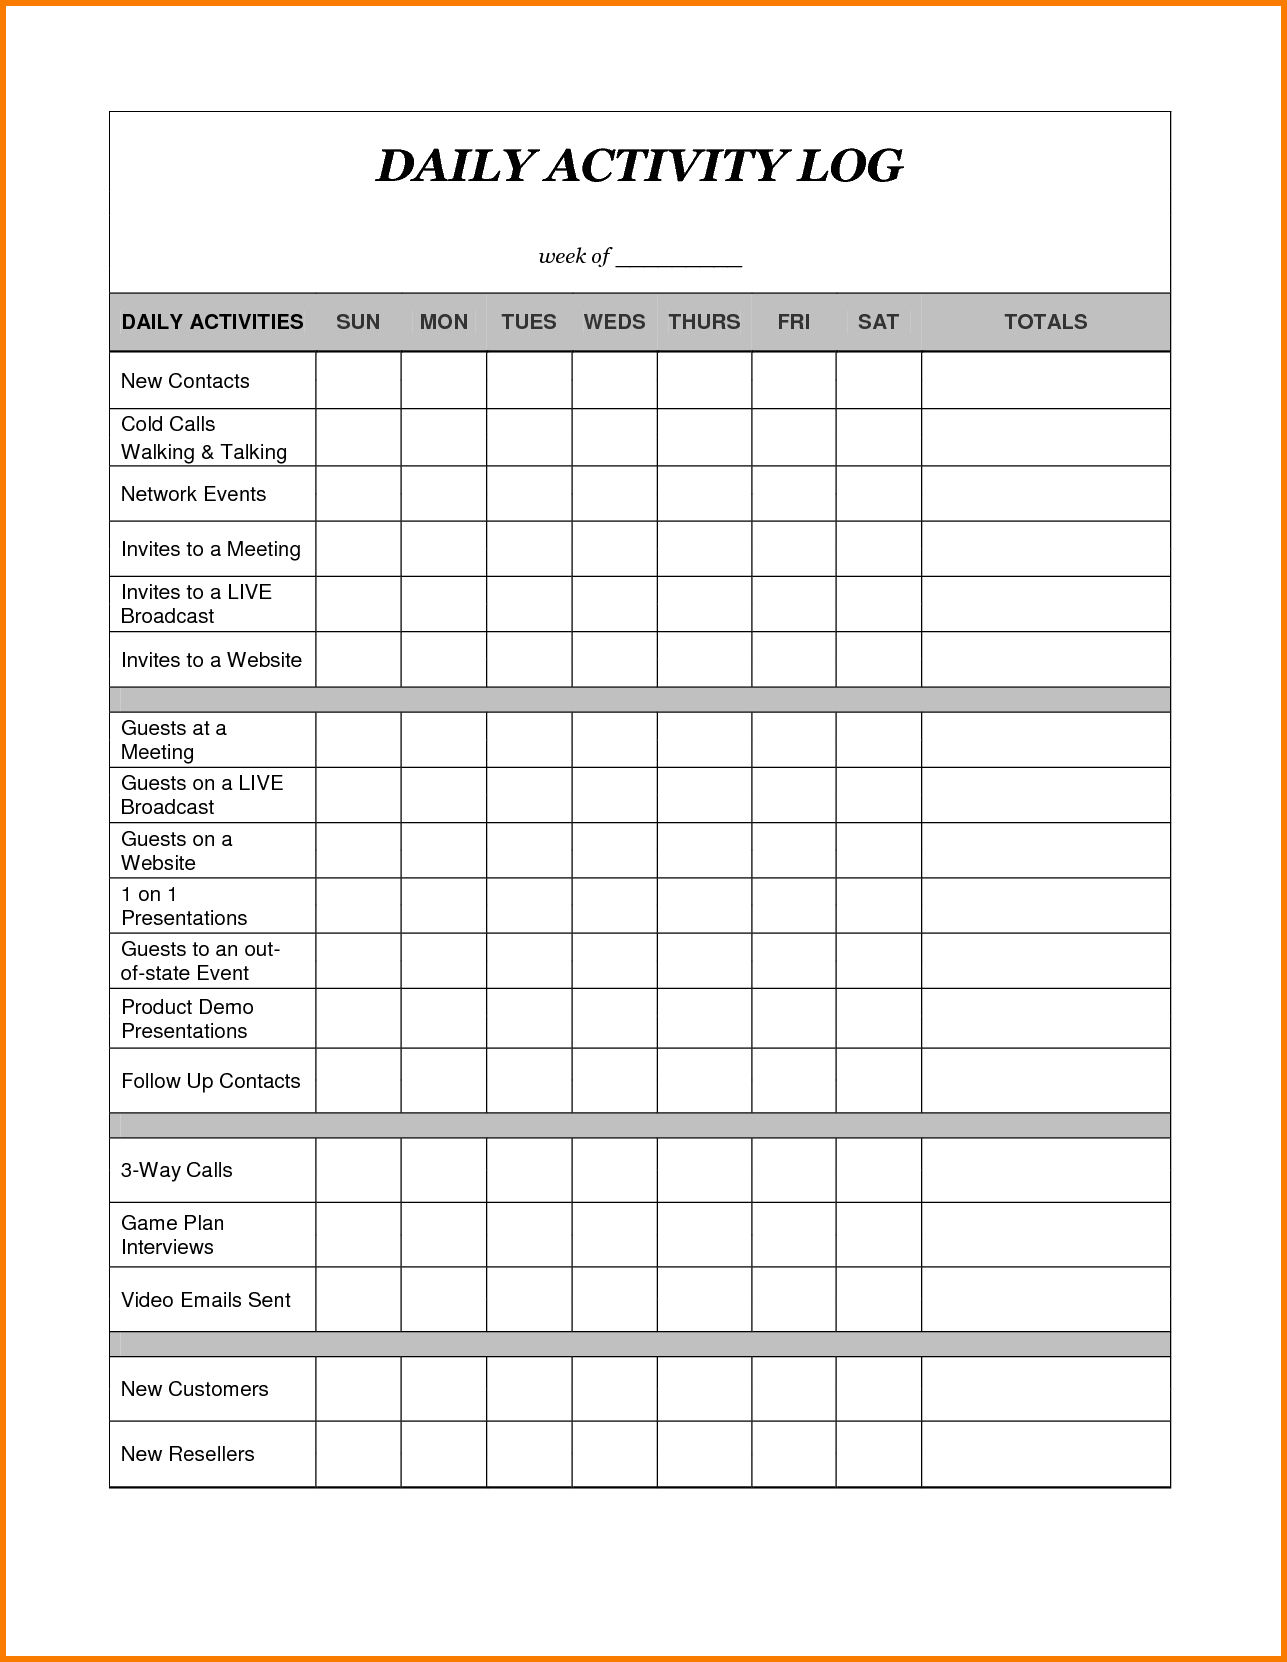 Forecast Spreadsheet for Sales Forecast Spreadsheet And Excel Templates  Tagua Spreadsheet